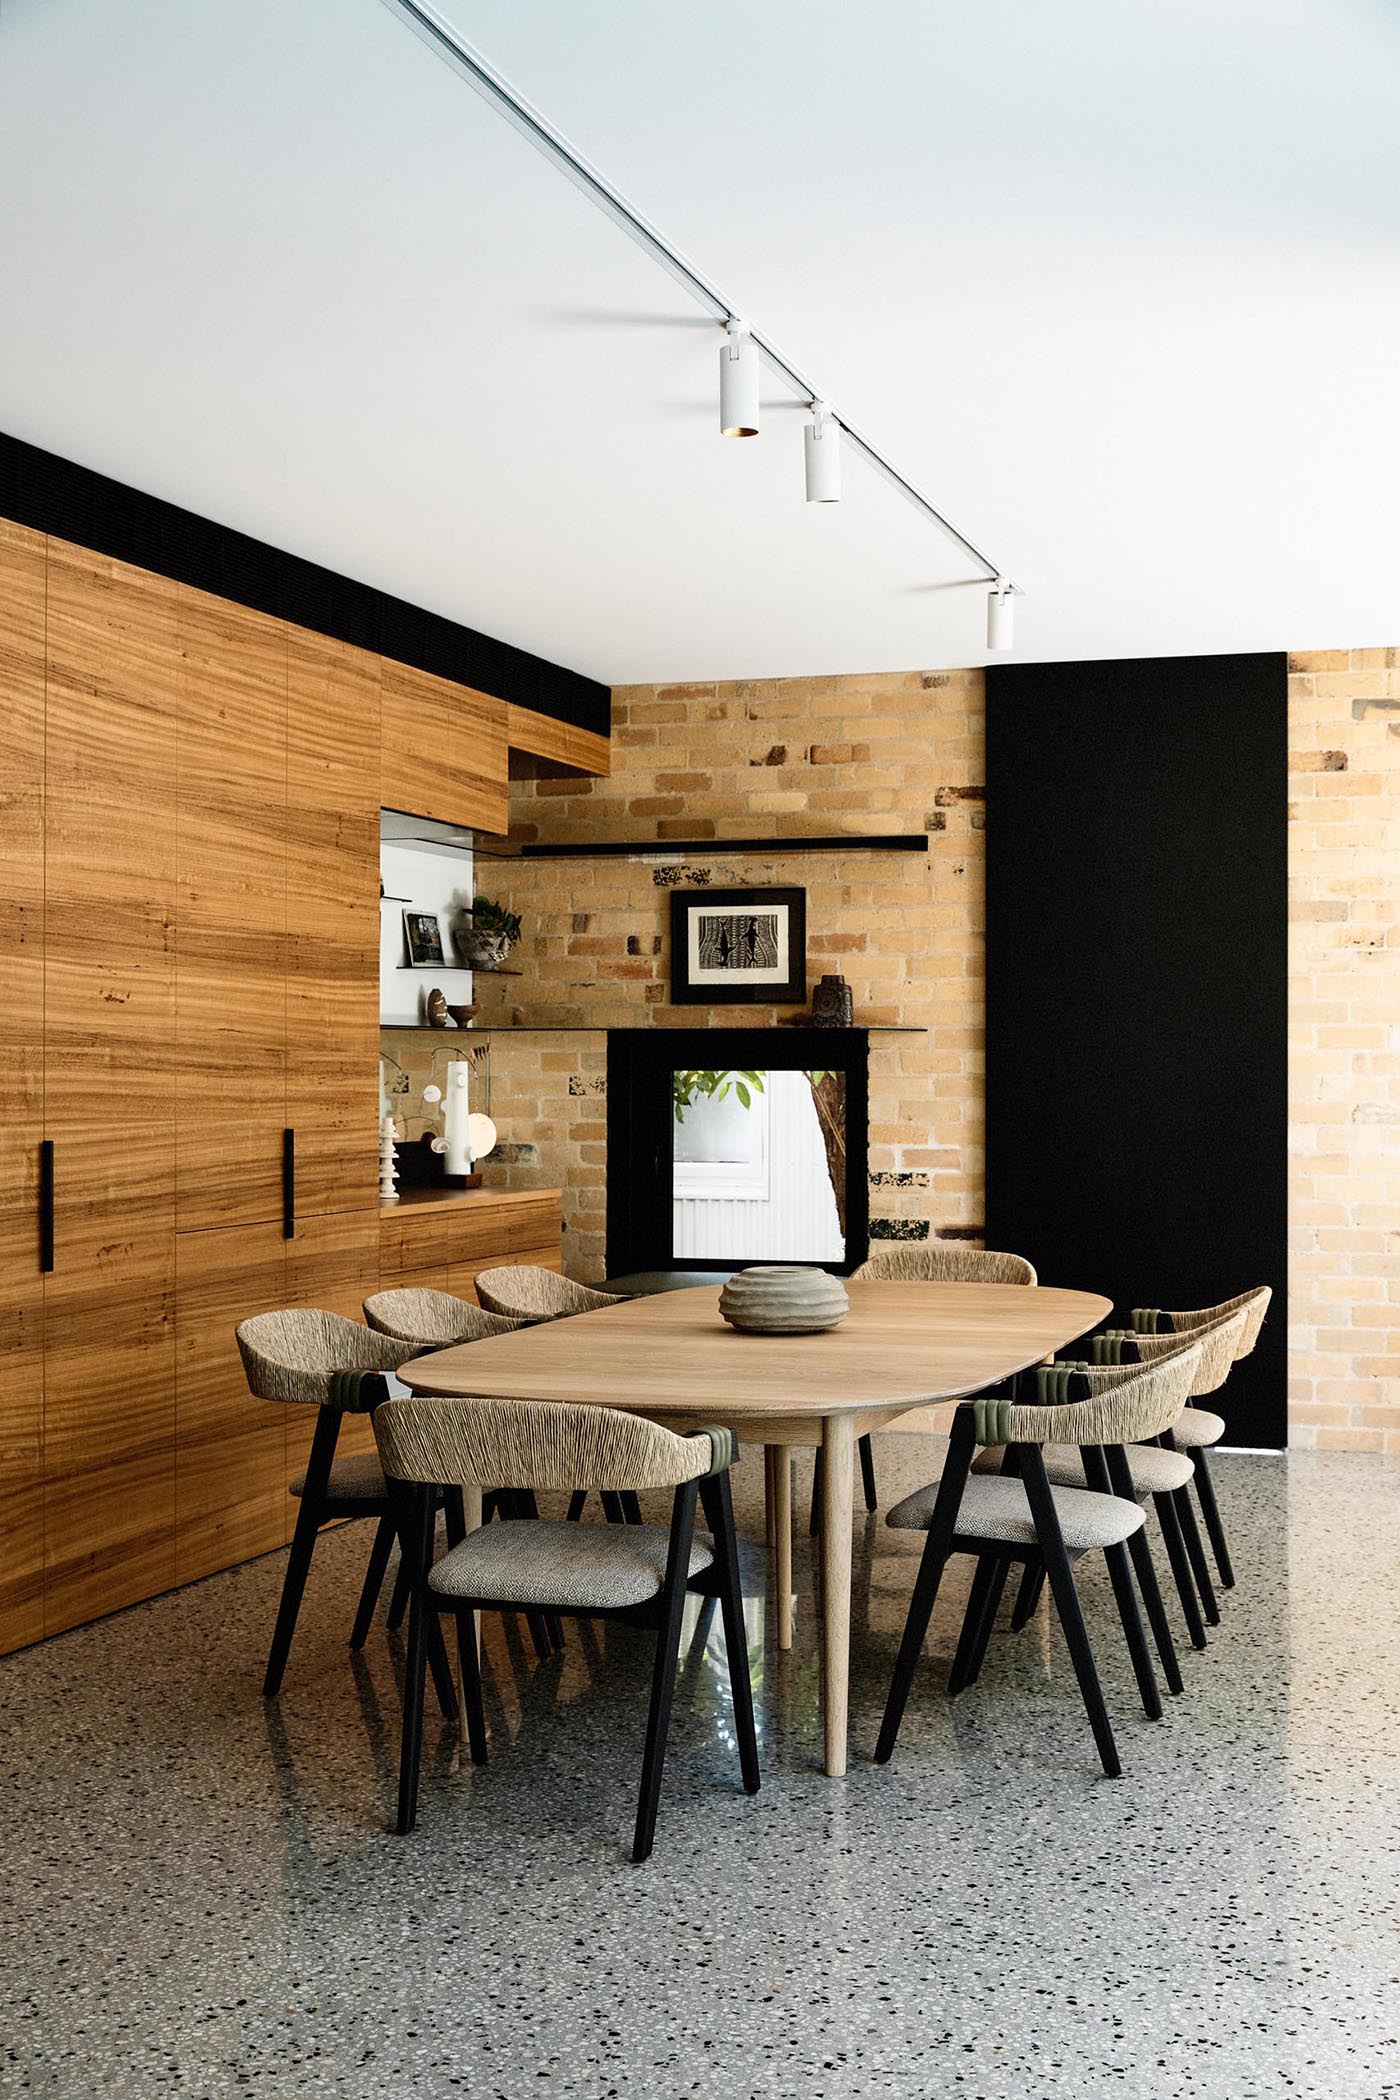 The wood cabinets from the kitchen continue through to this dining room, and result in an open niche with shelving. Beside the cabinets and in the brick wall, there's a small built-in window seat.